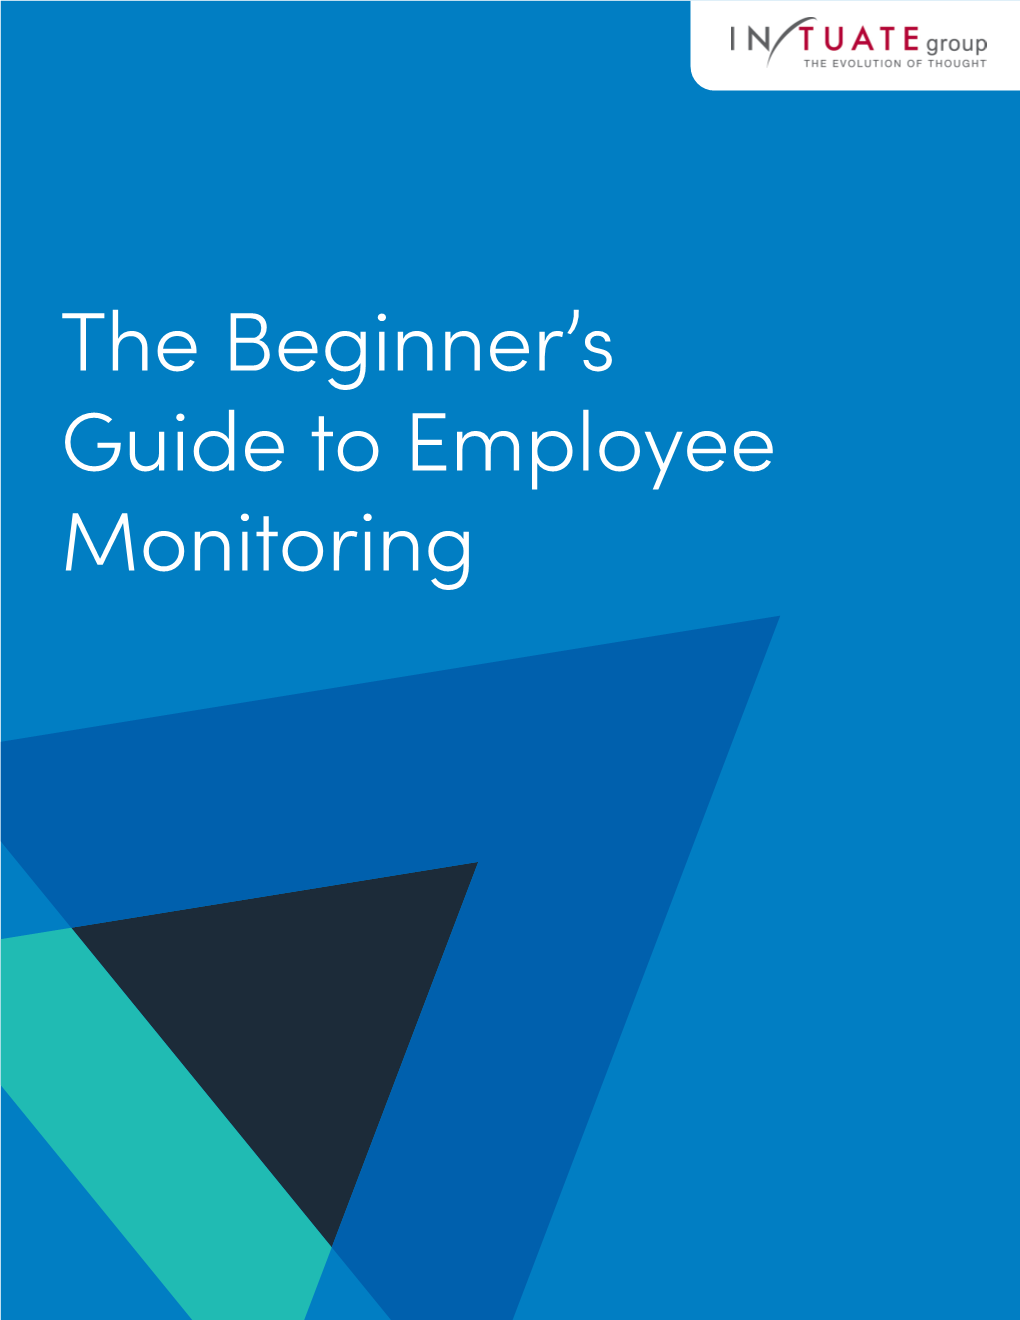 The Beginner's Guide to Employee Monitoring